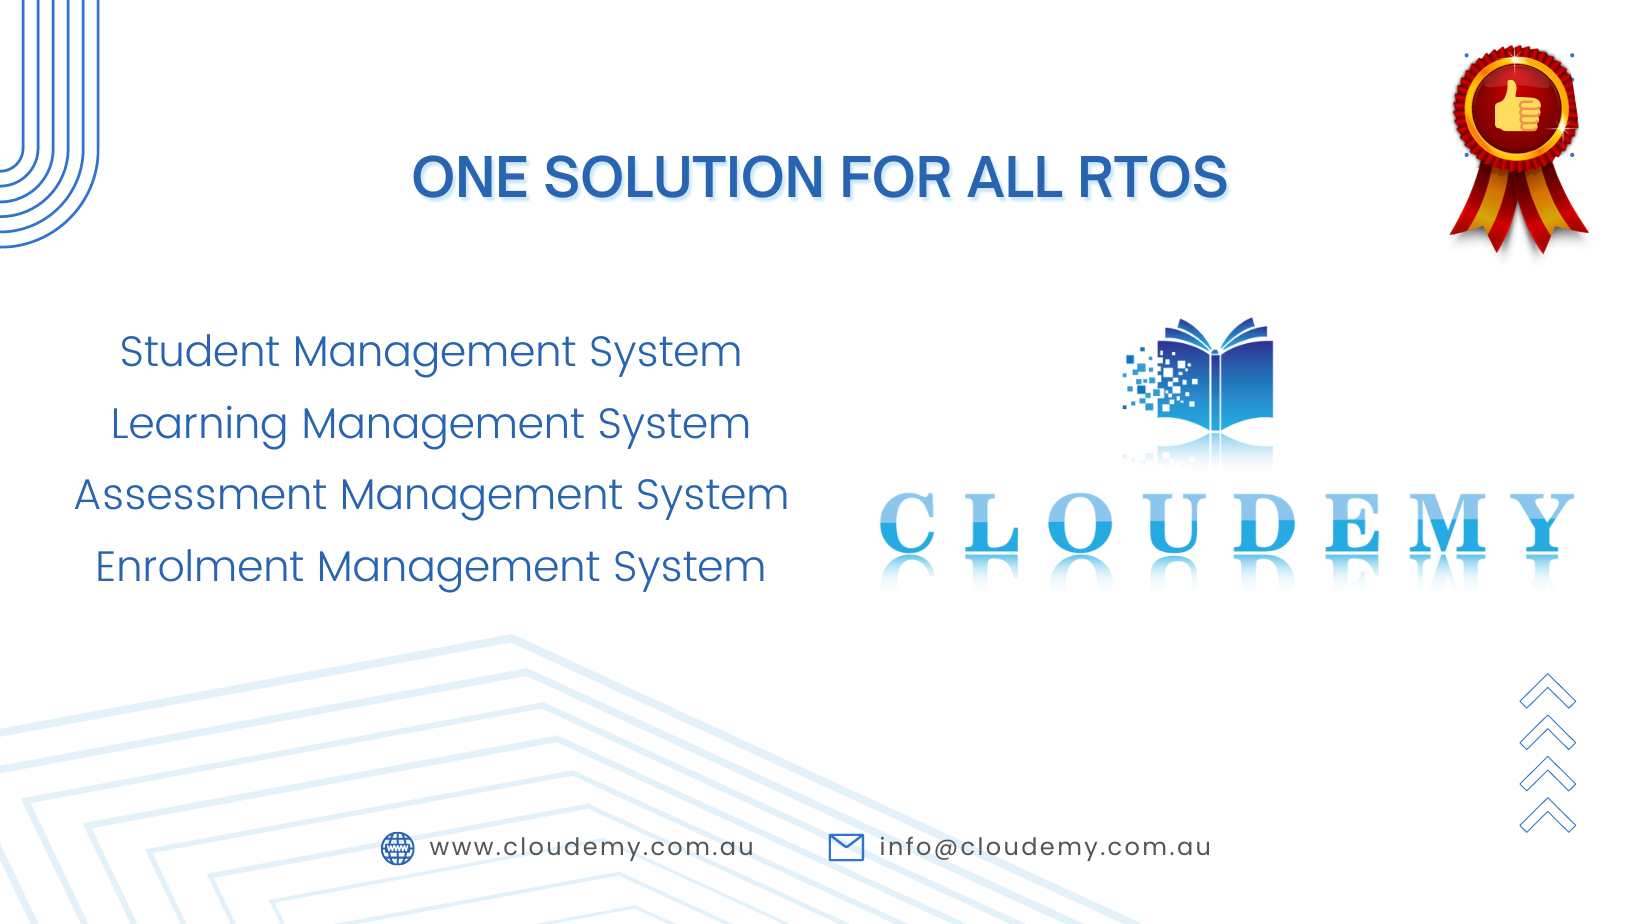 Cloudemy - Streamlined Student Management for RTOs